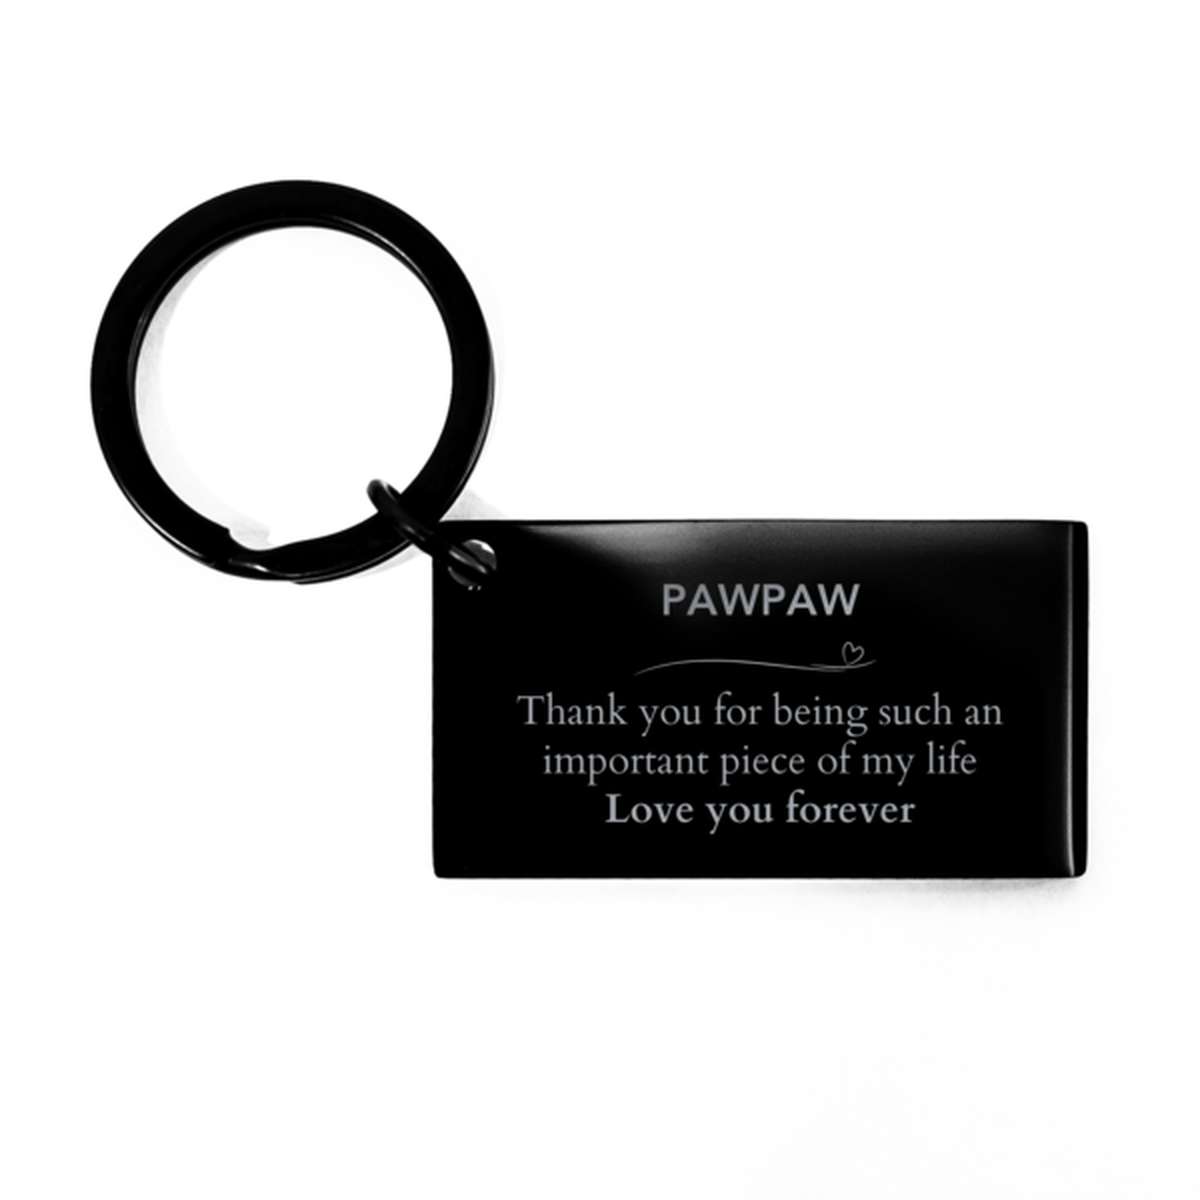 Appropriate Pawpaw Keychain Epic Birthday Gifts for Pawpaw Thank you for being such an important piece of my life Pawpaw Christmas Mothers Fathers Day